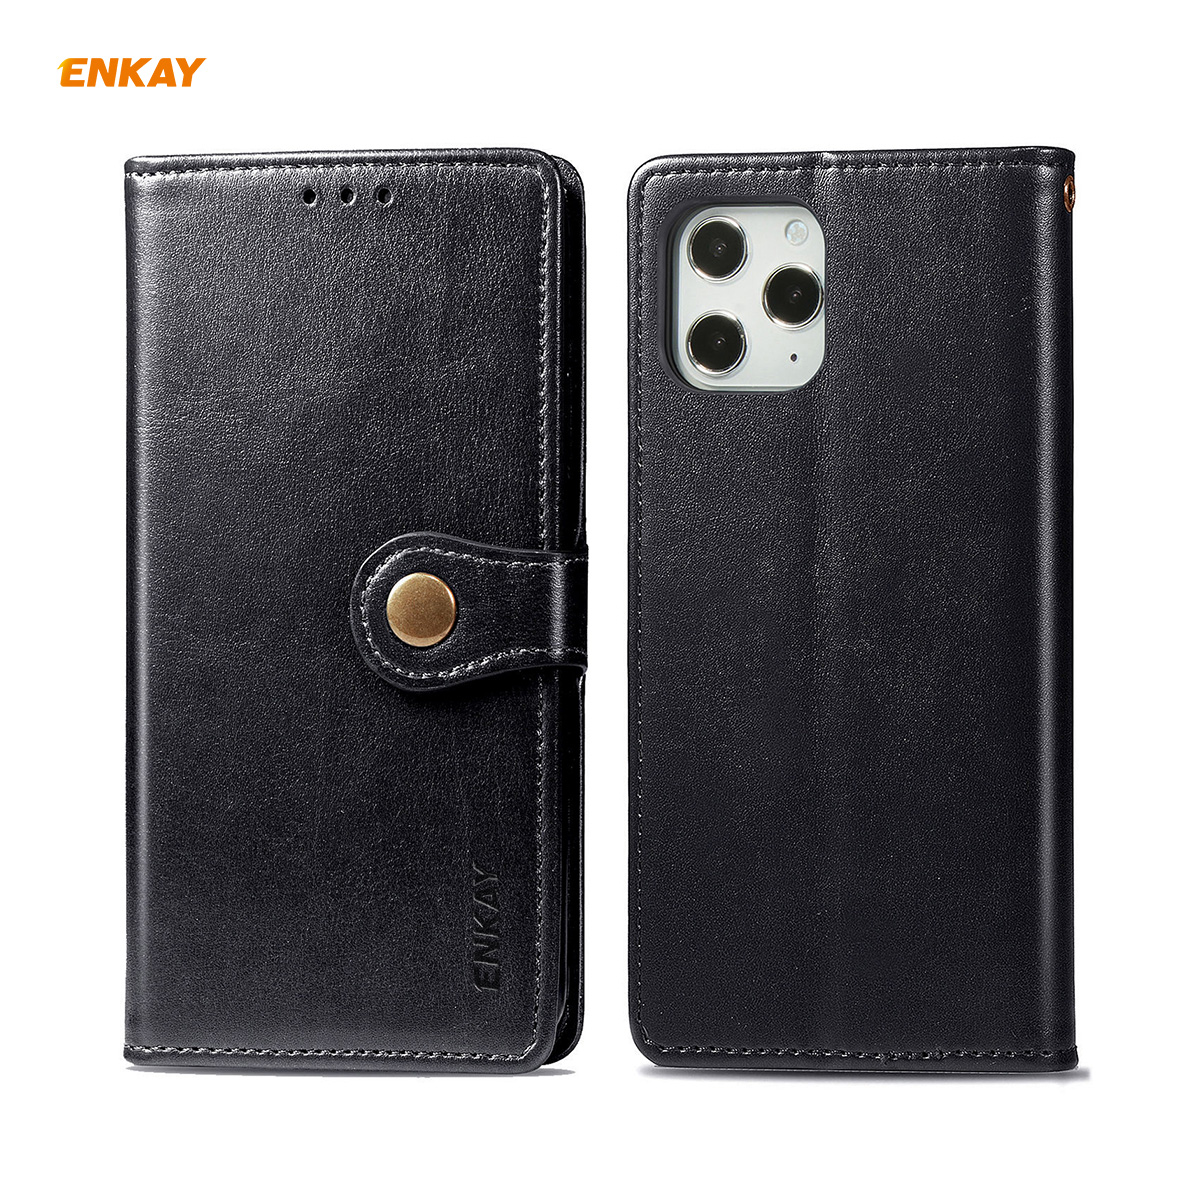 Enkay-for-iPhone-12-Pro-Max-Case-Retro-Litchi-Pattern-Flip-with-Mutiple-Card-Slots-Wallet-Stand-PU-L-1755116-6